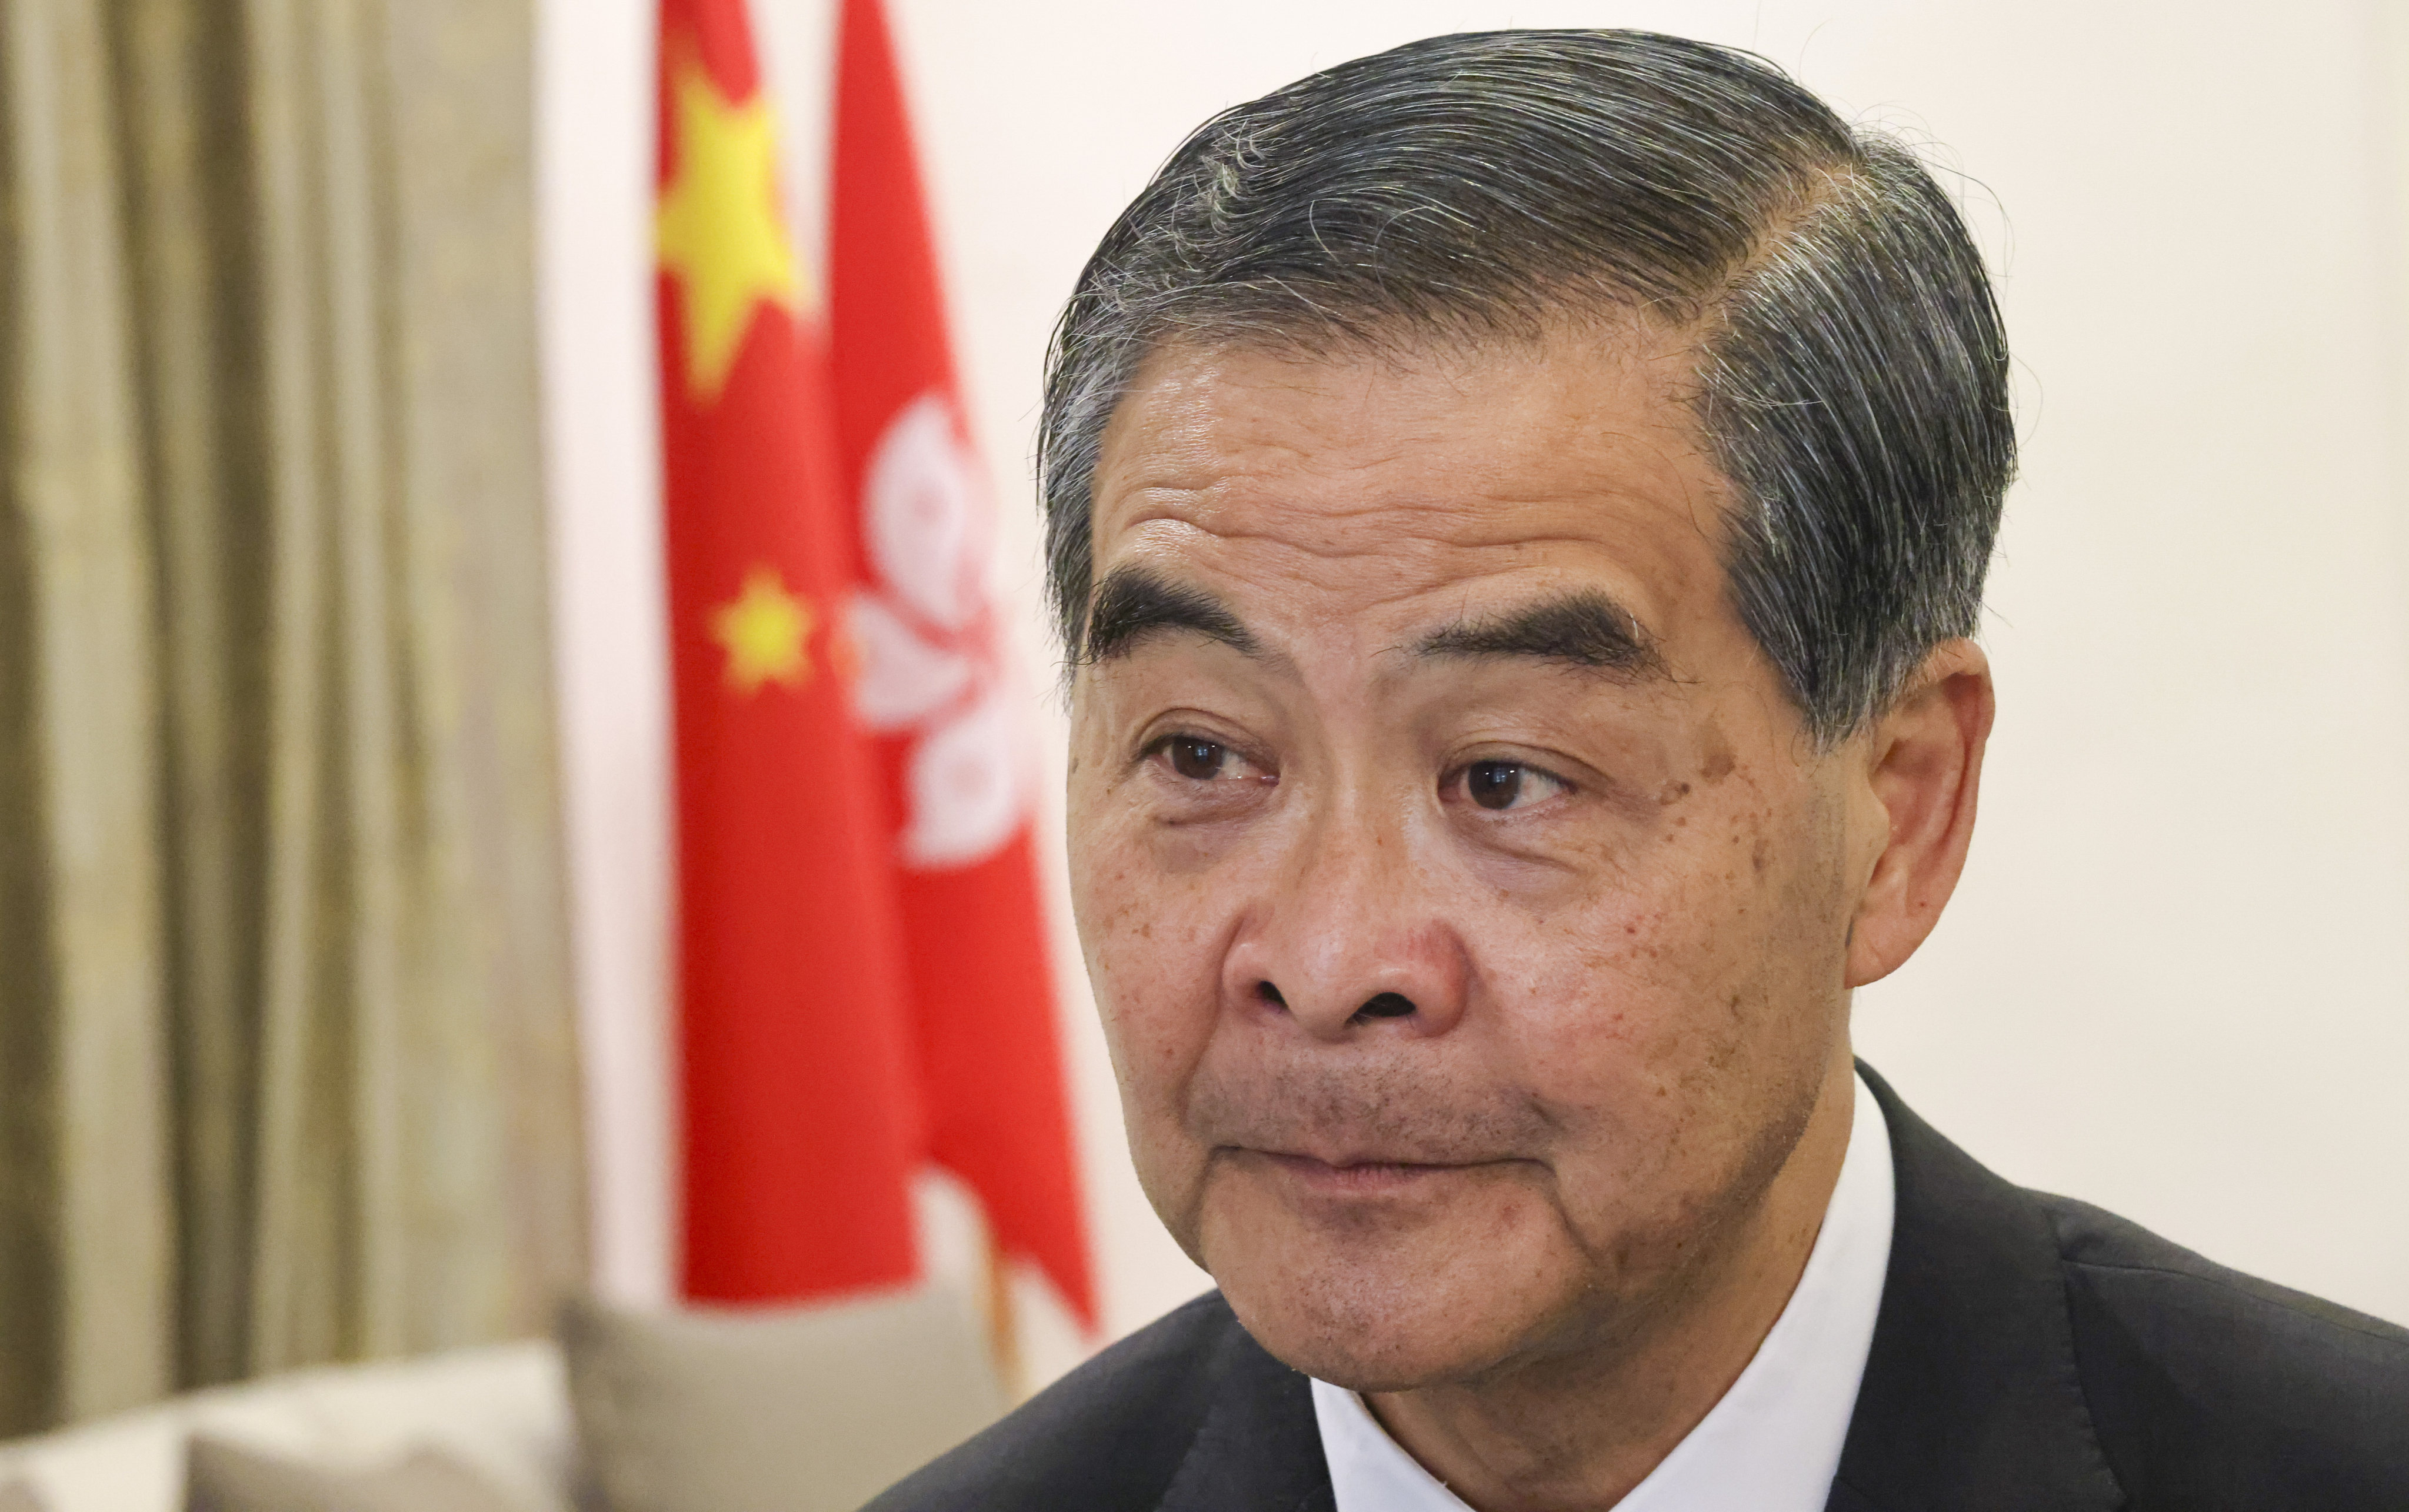 CY Leung, a former chief executive of Hong Kong, has attacked the appointment of an English barrister to defend media tycoon Jimmy Lai on national security charges. Photo: Nora Tam